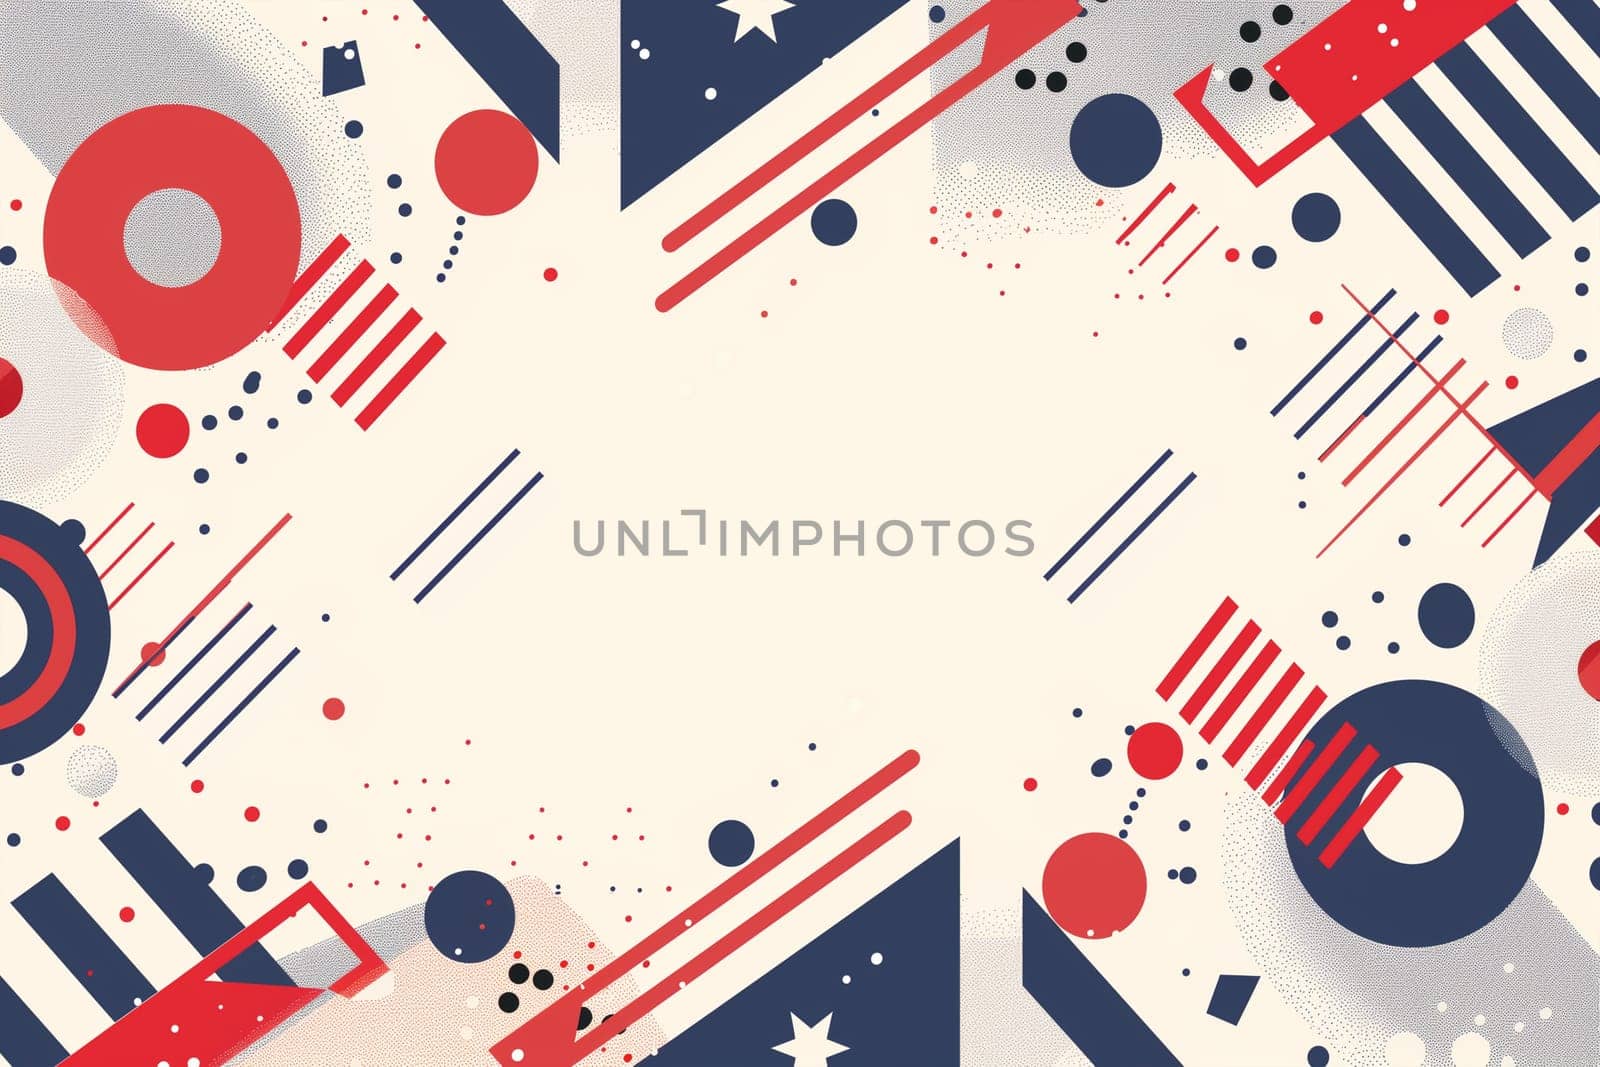 Geometric shapes in red, white, and blue colors arranged in an abstract pattern.